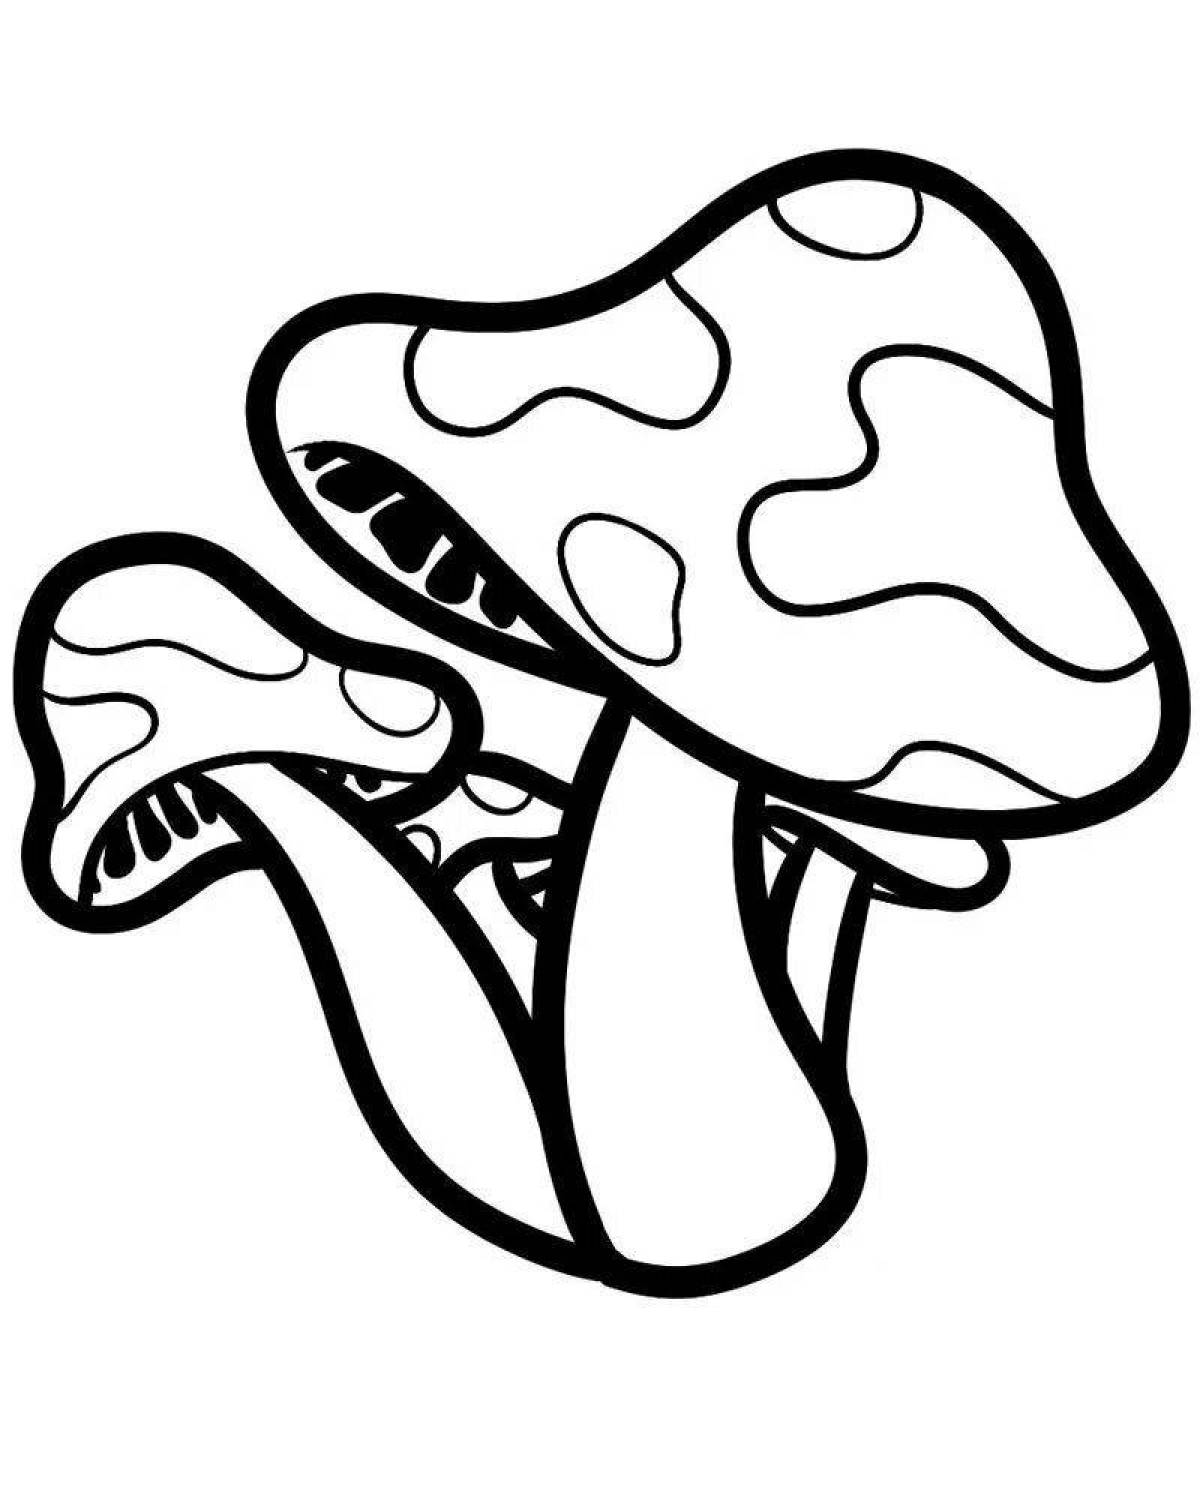 Radiant fly agaric frog coloring page